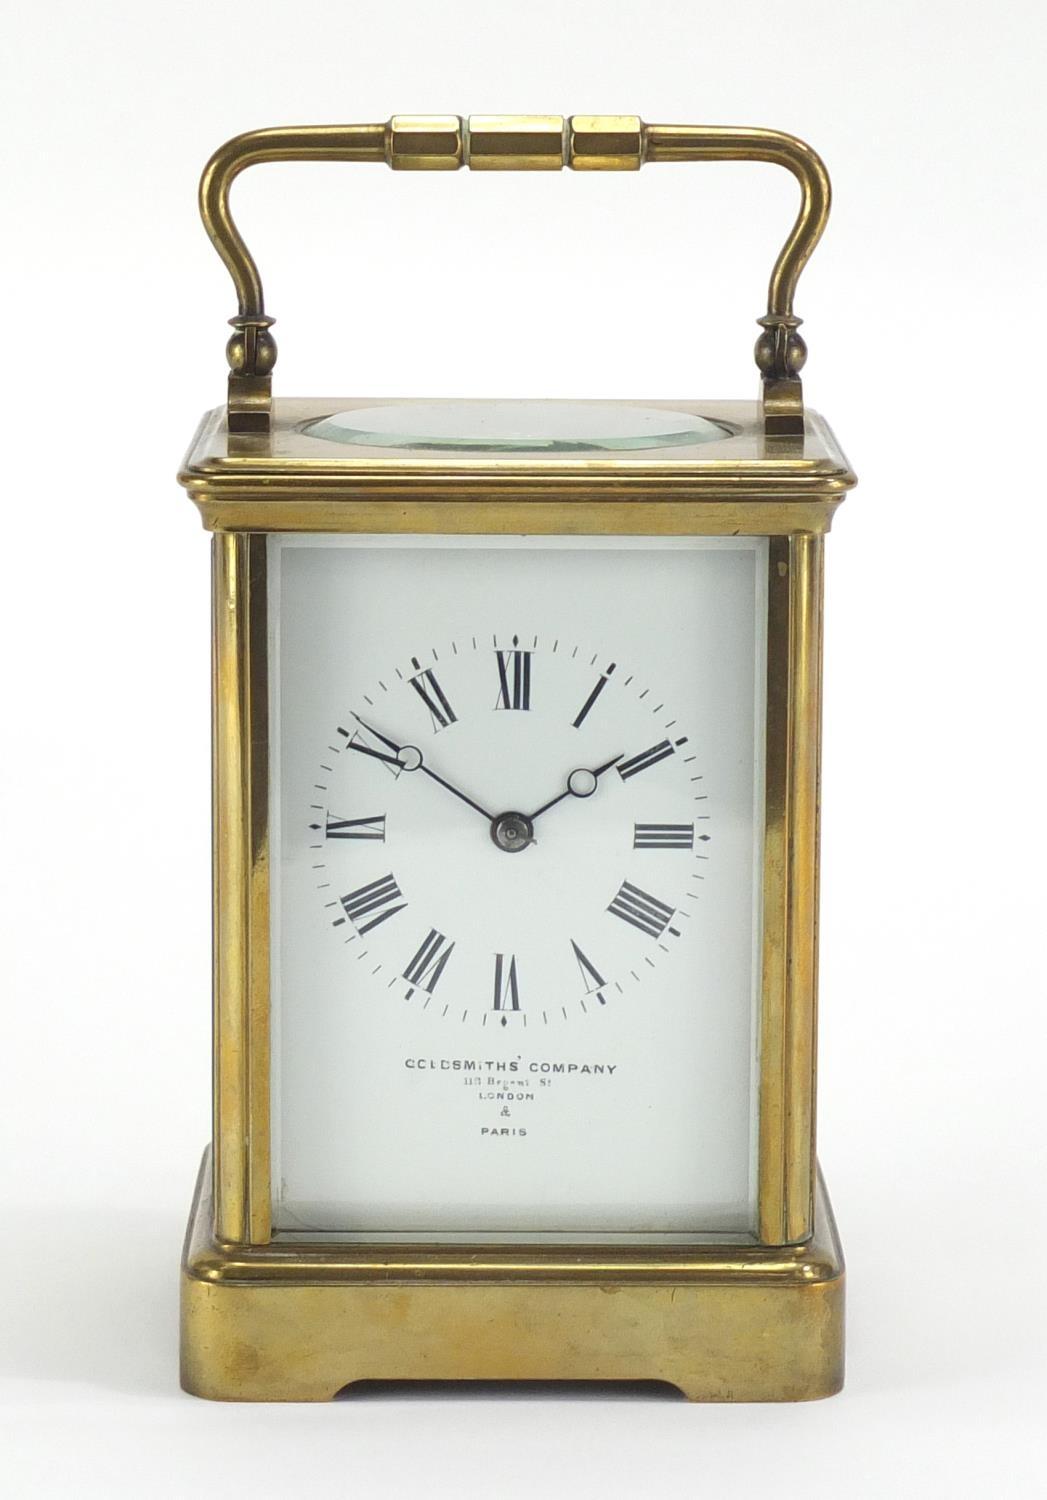 Brass cased carriage clock by Goldsmiths Company London and Paris, with enamelled dial and Roman - Image 2 of 6